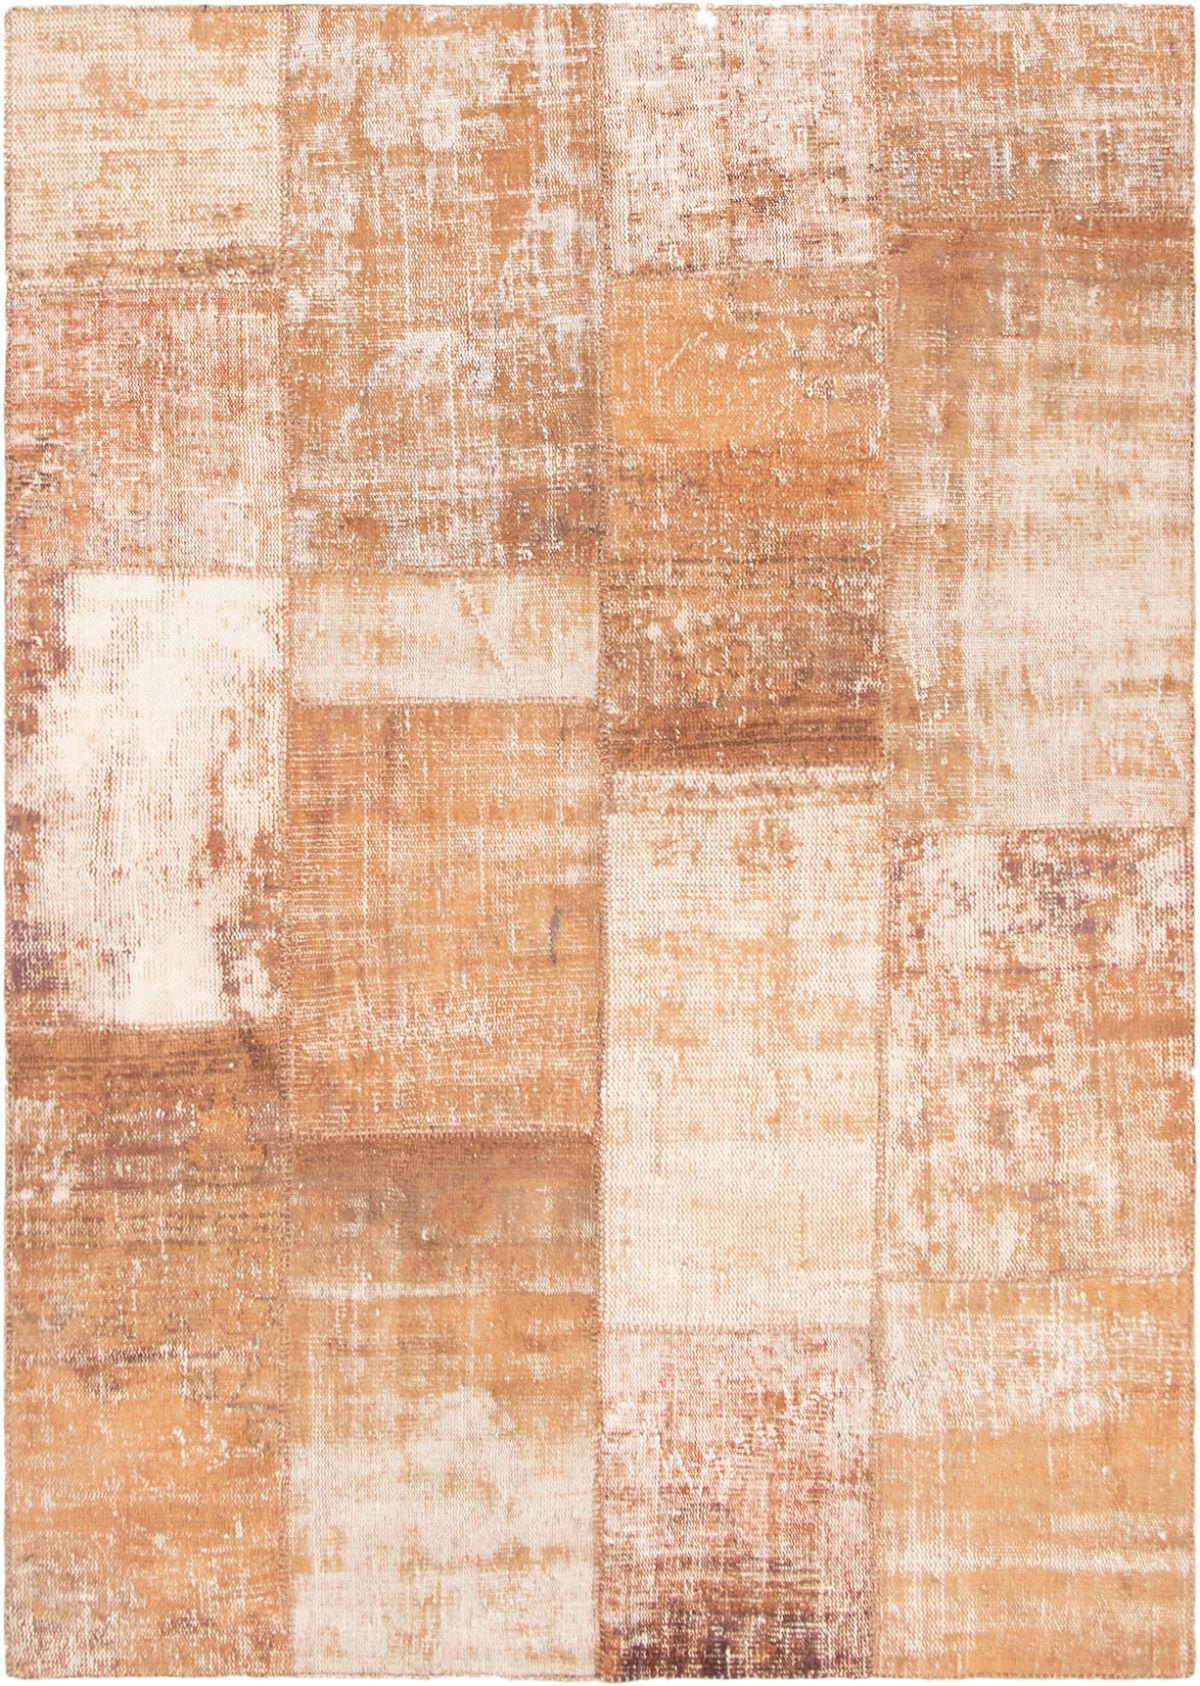 Hand-knotted Color Transition Patch Brown Wool Rug 5'9" x 8'2"  Size: 5'9" x 8'2"  